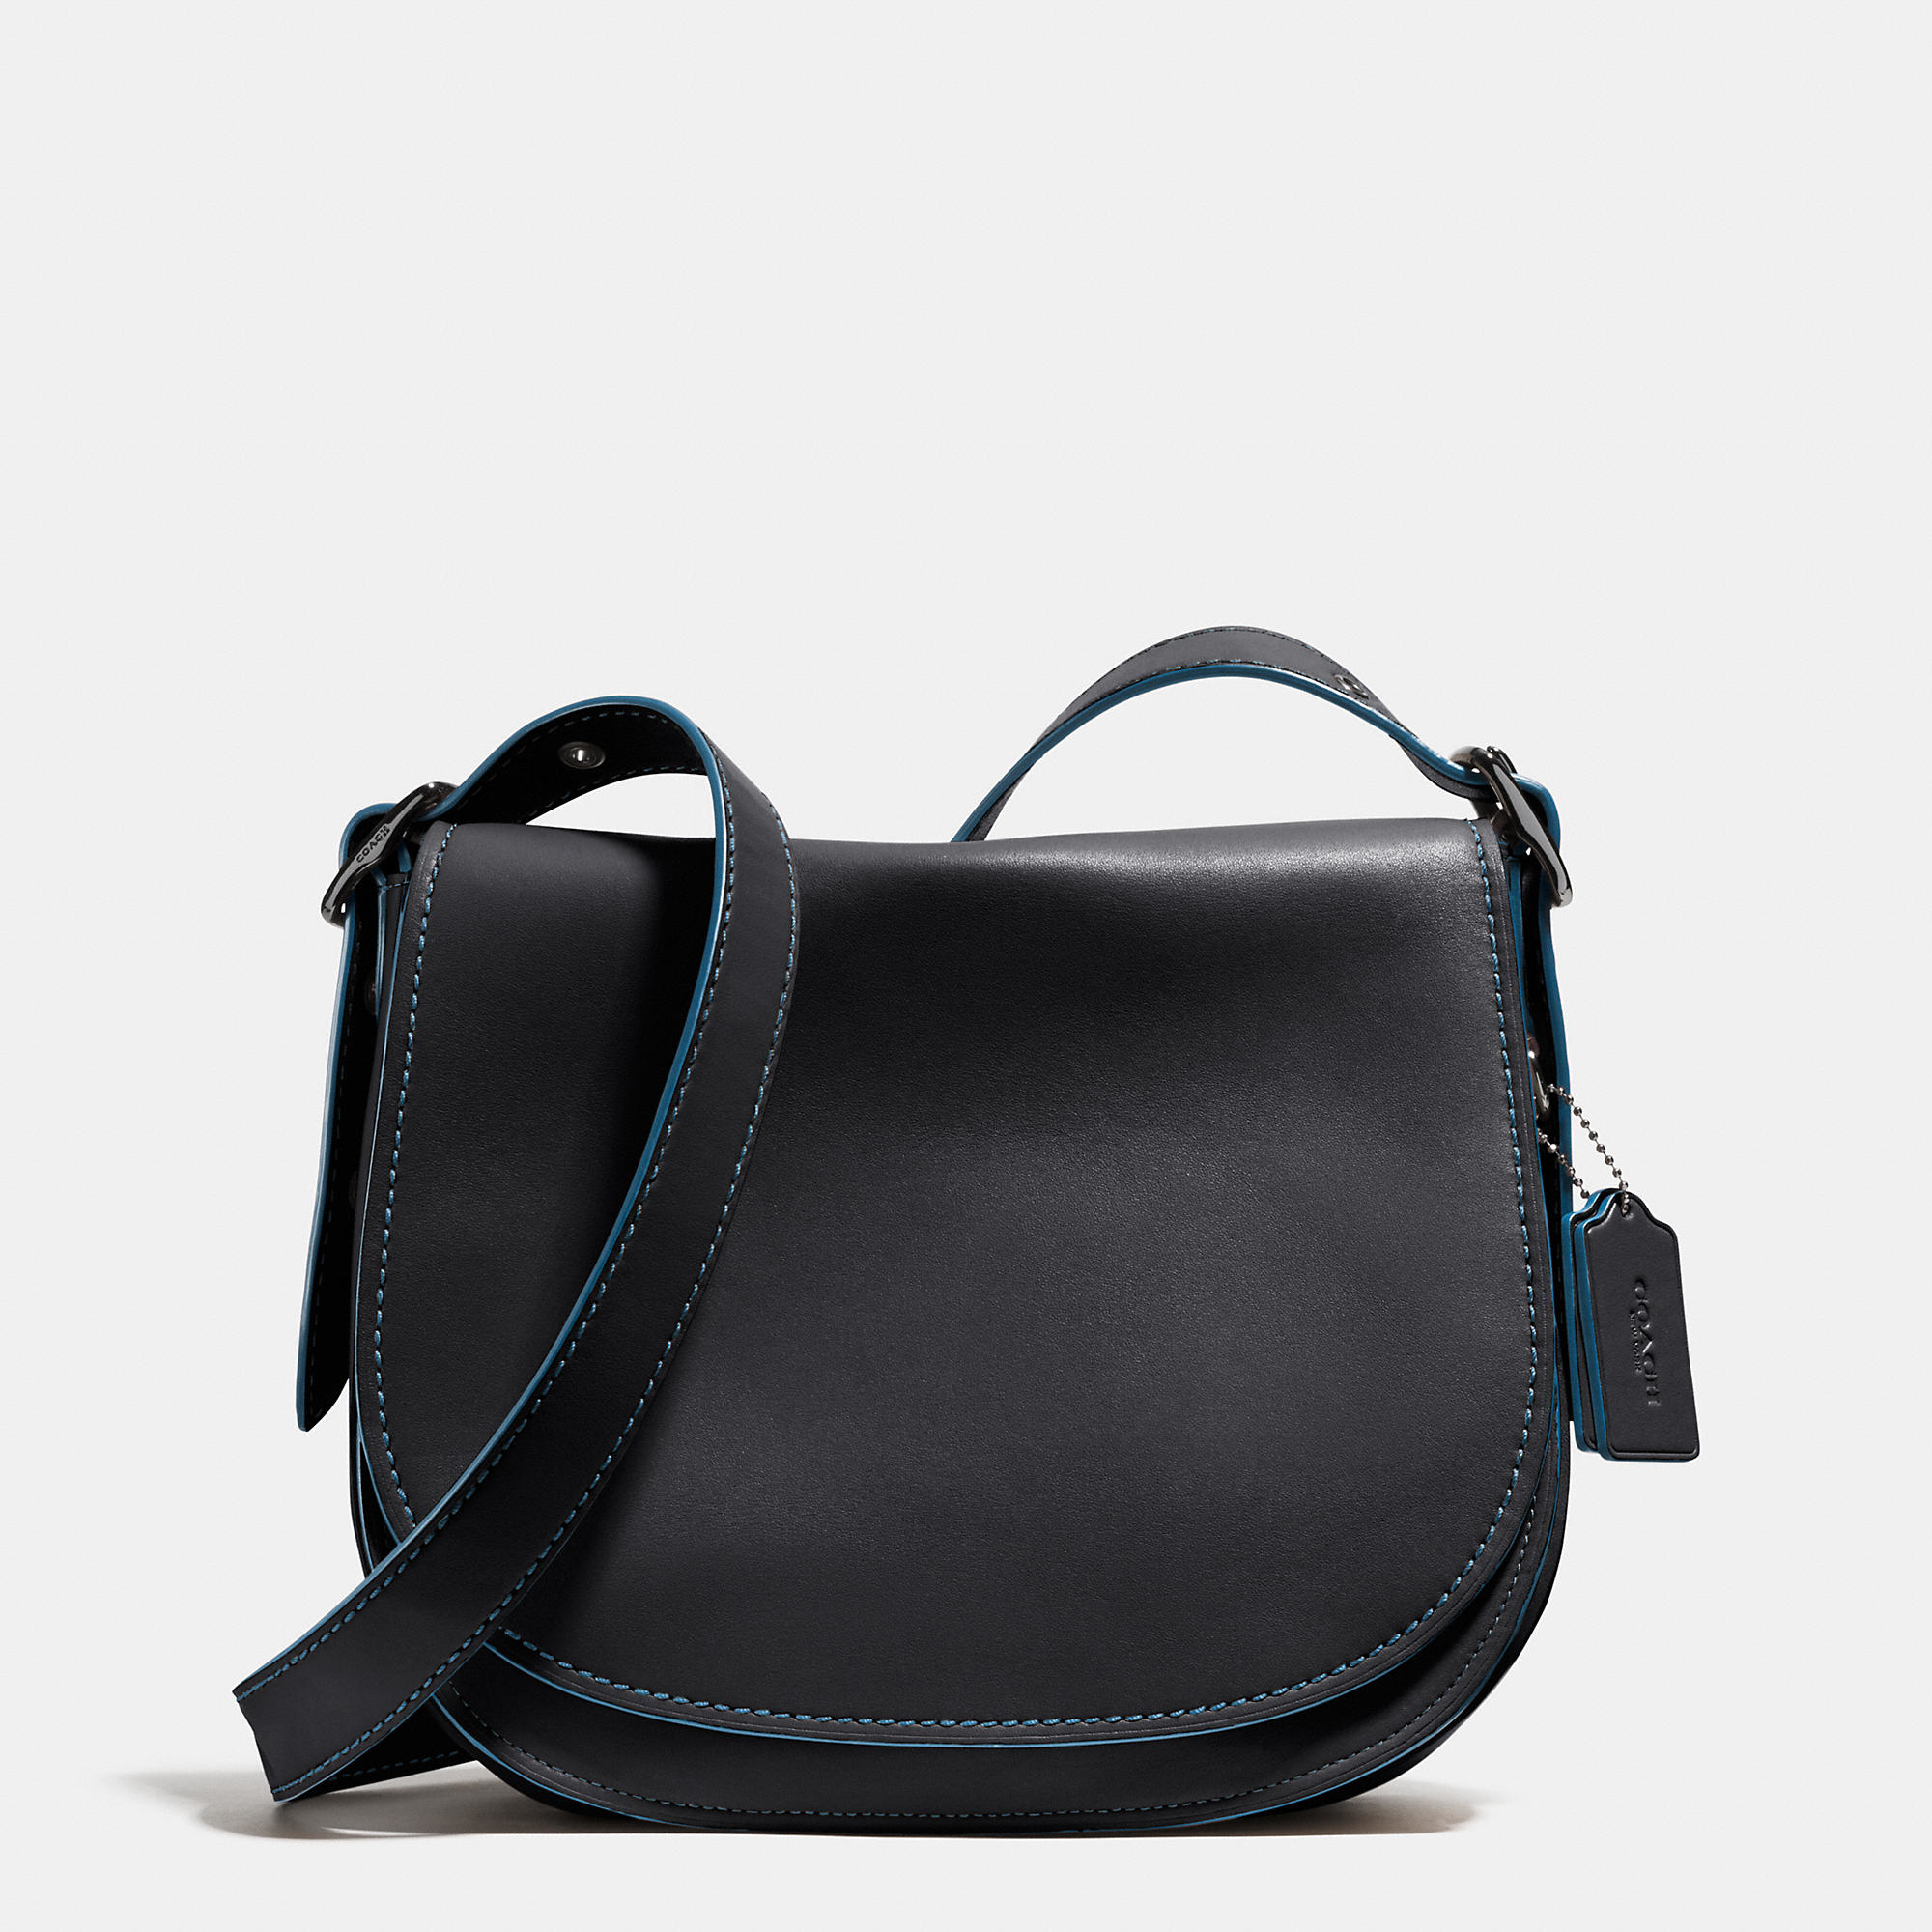 COACH Saddle Bag In Glovetanned Leather in Gray | Lyst